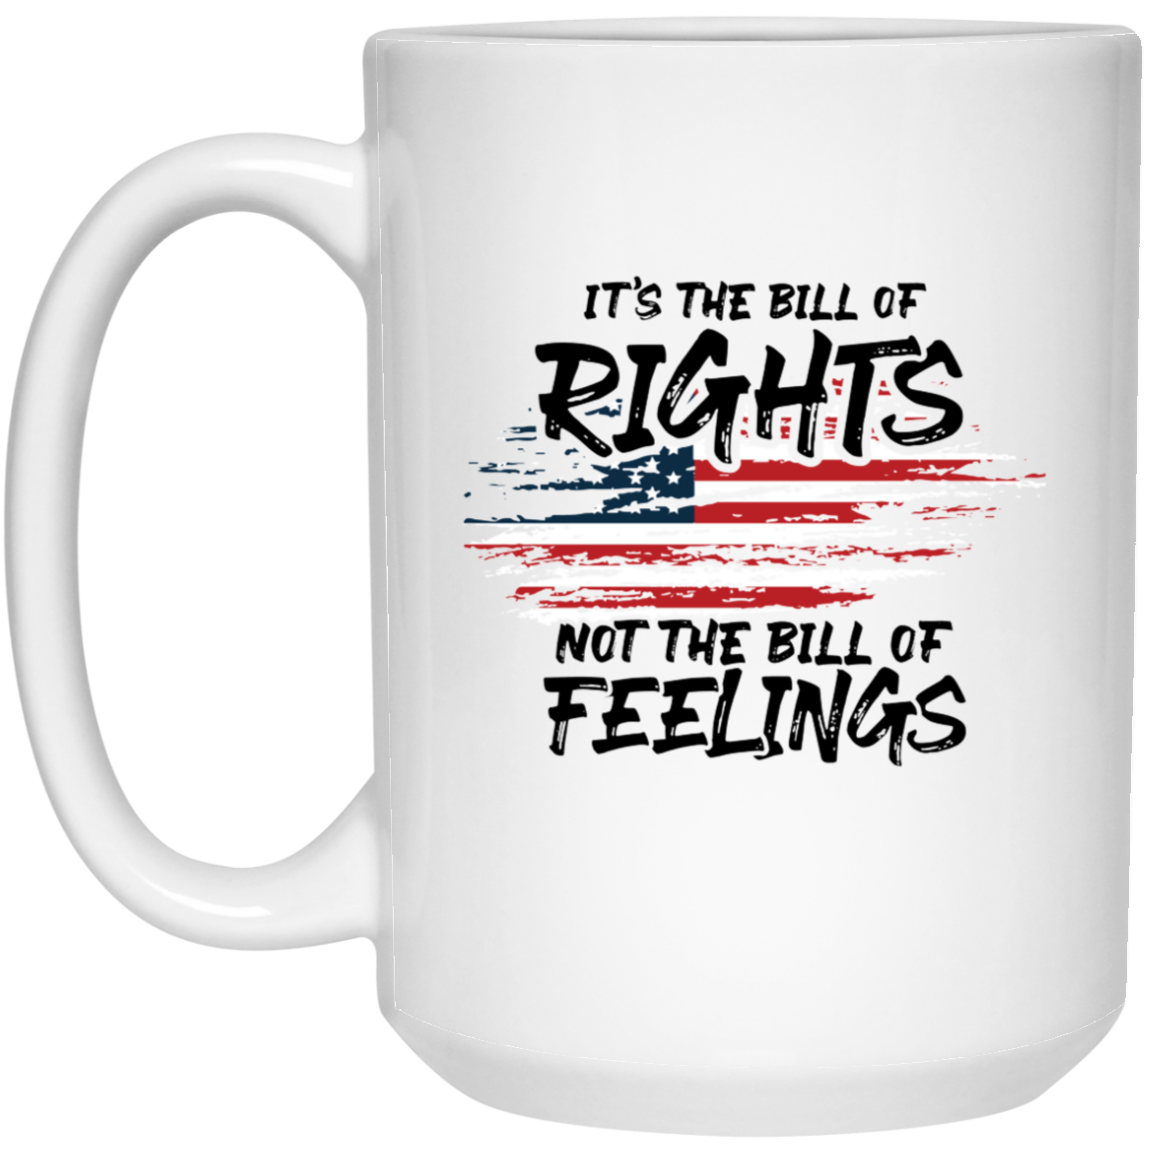 It's The Bill Of Rights Not The Bill Of Feelings - MUGS